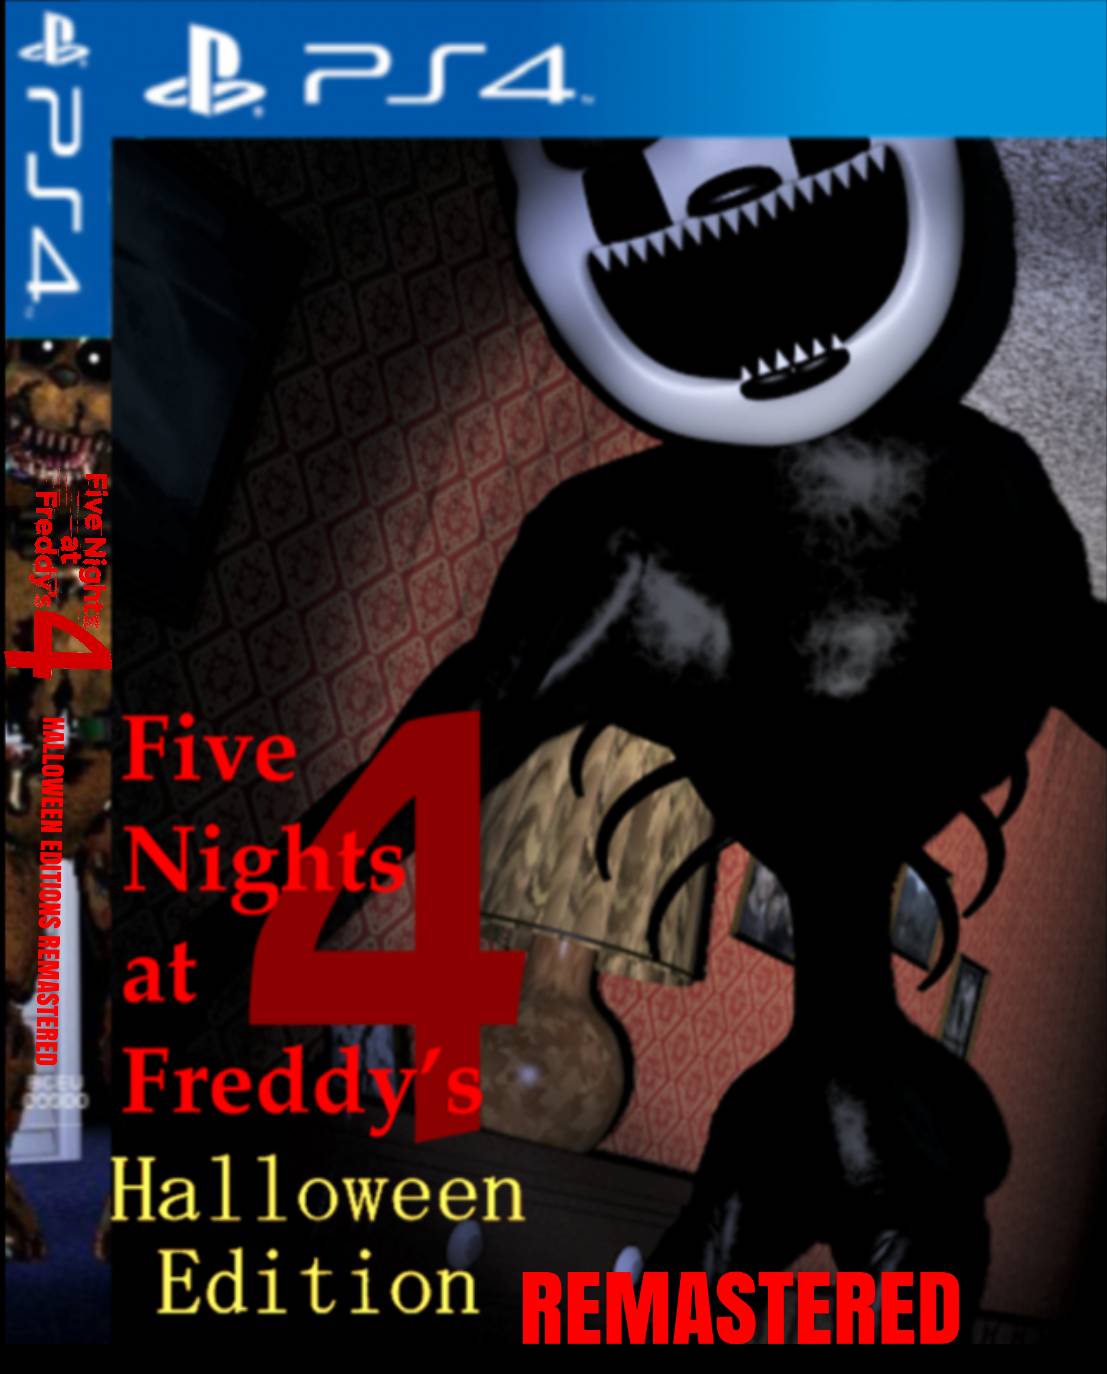 Five Nights at Freddy's 4 Halloween Edition.